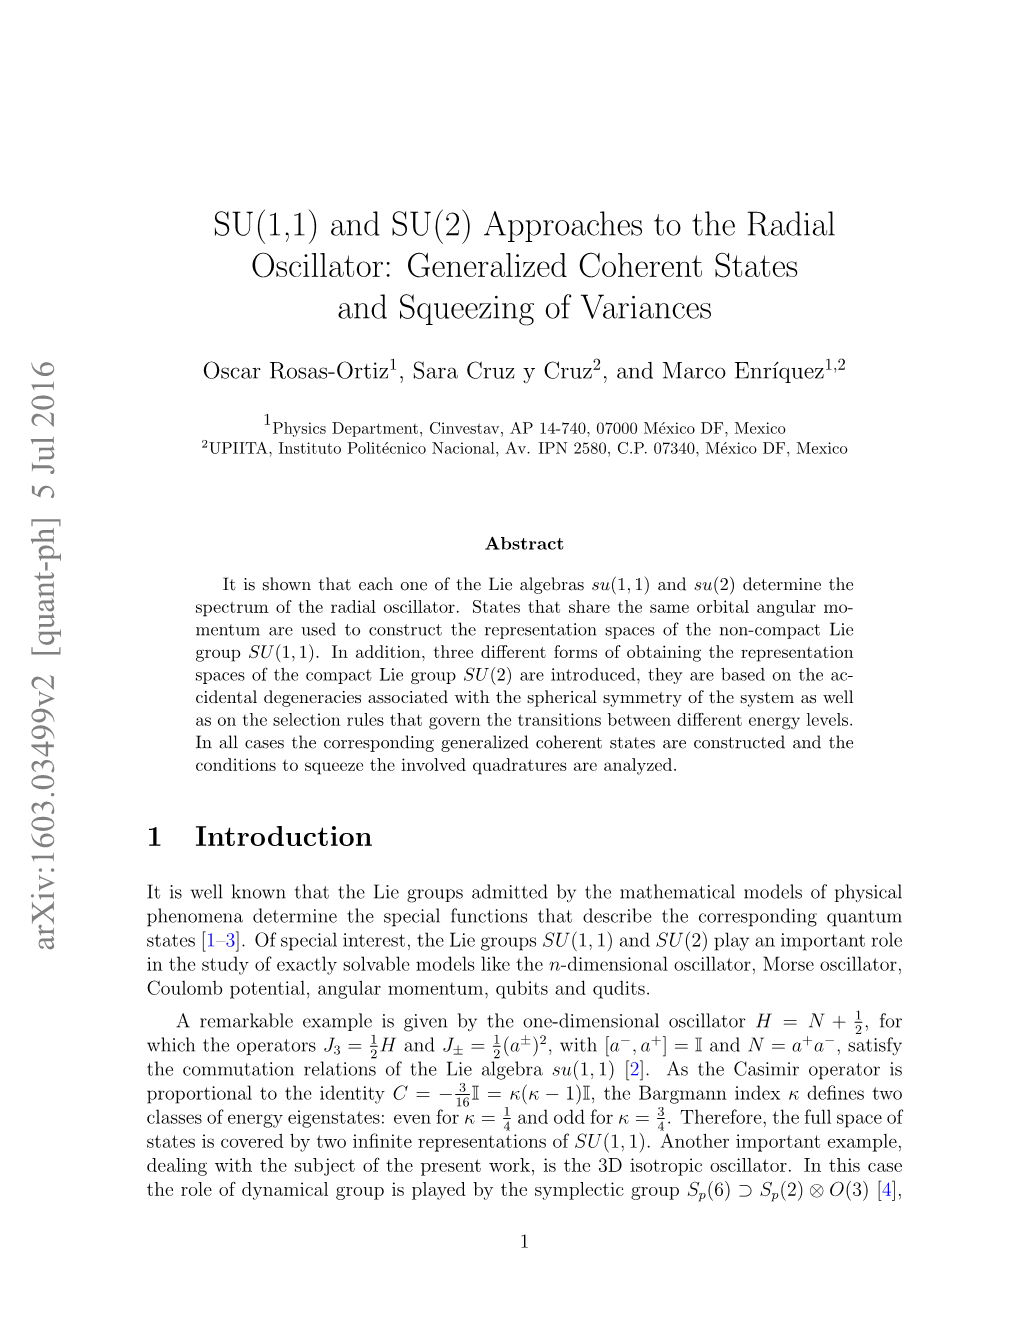 SU(1,1) and SU(2) Approaches to the Radial Oscillator: Generalized Coherent States and Squeezing of Variances